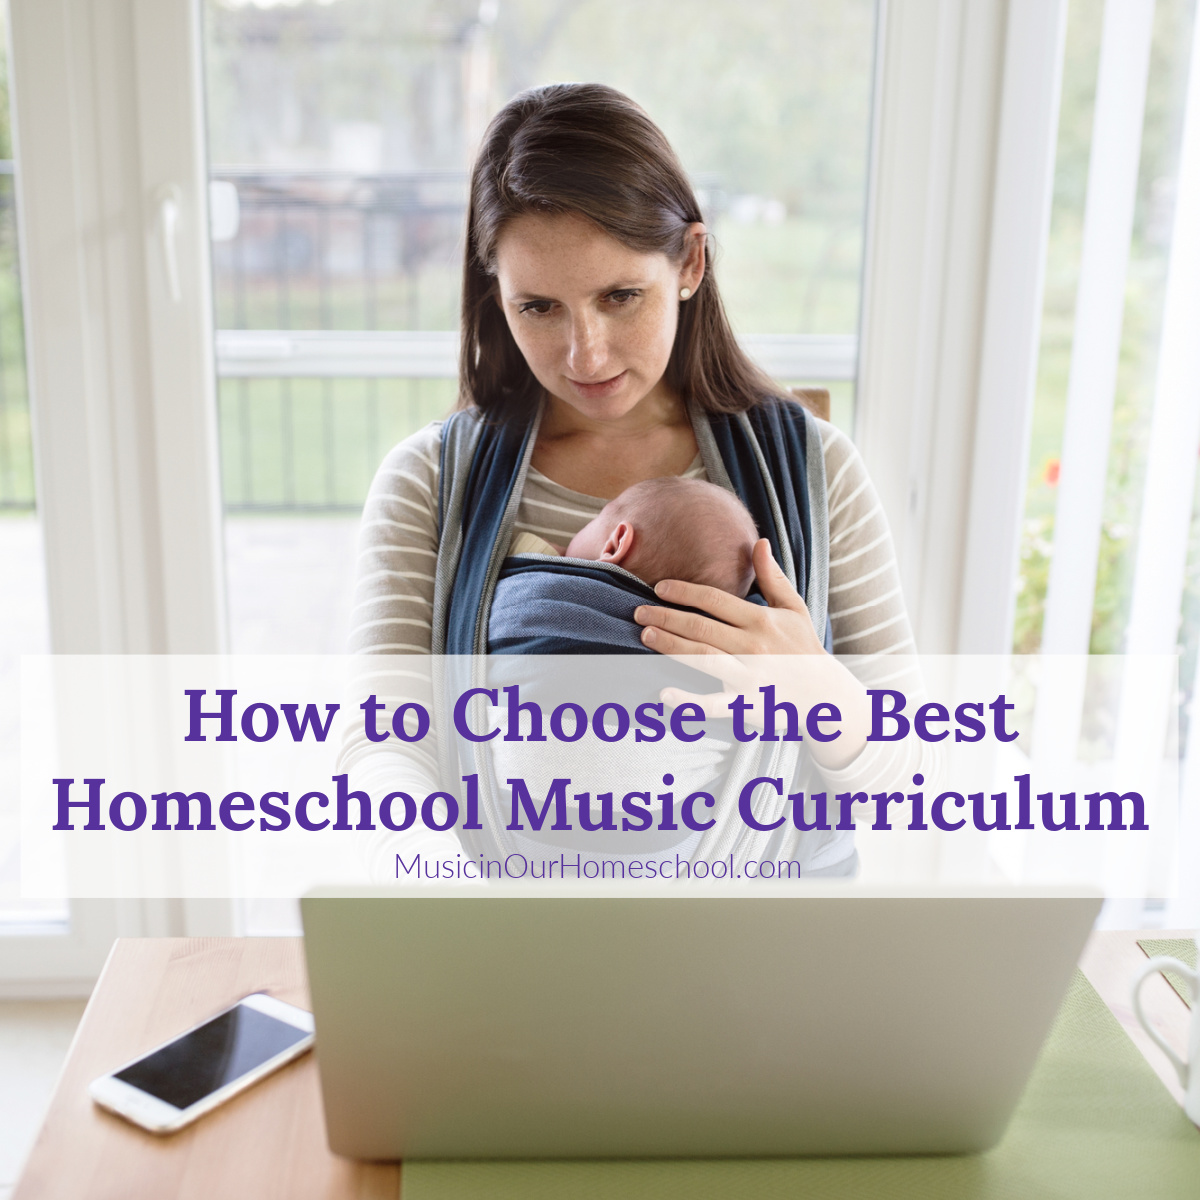 How to Choose the Best Homeschool Music Curriculum